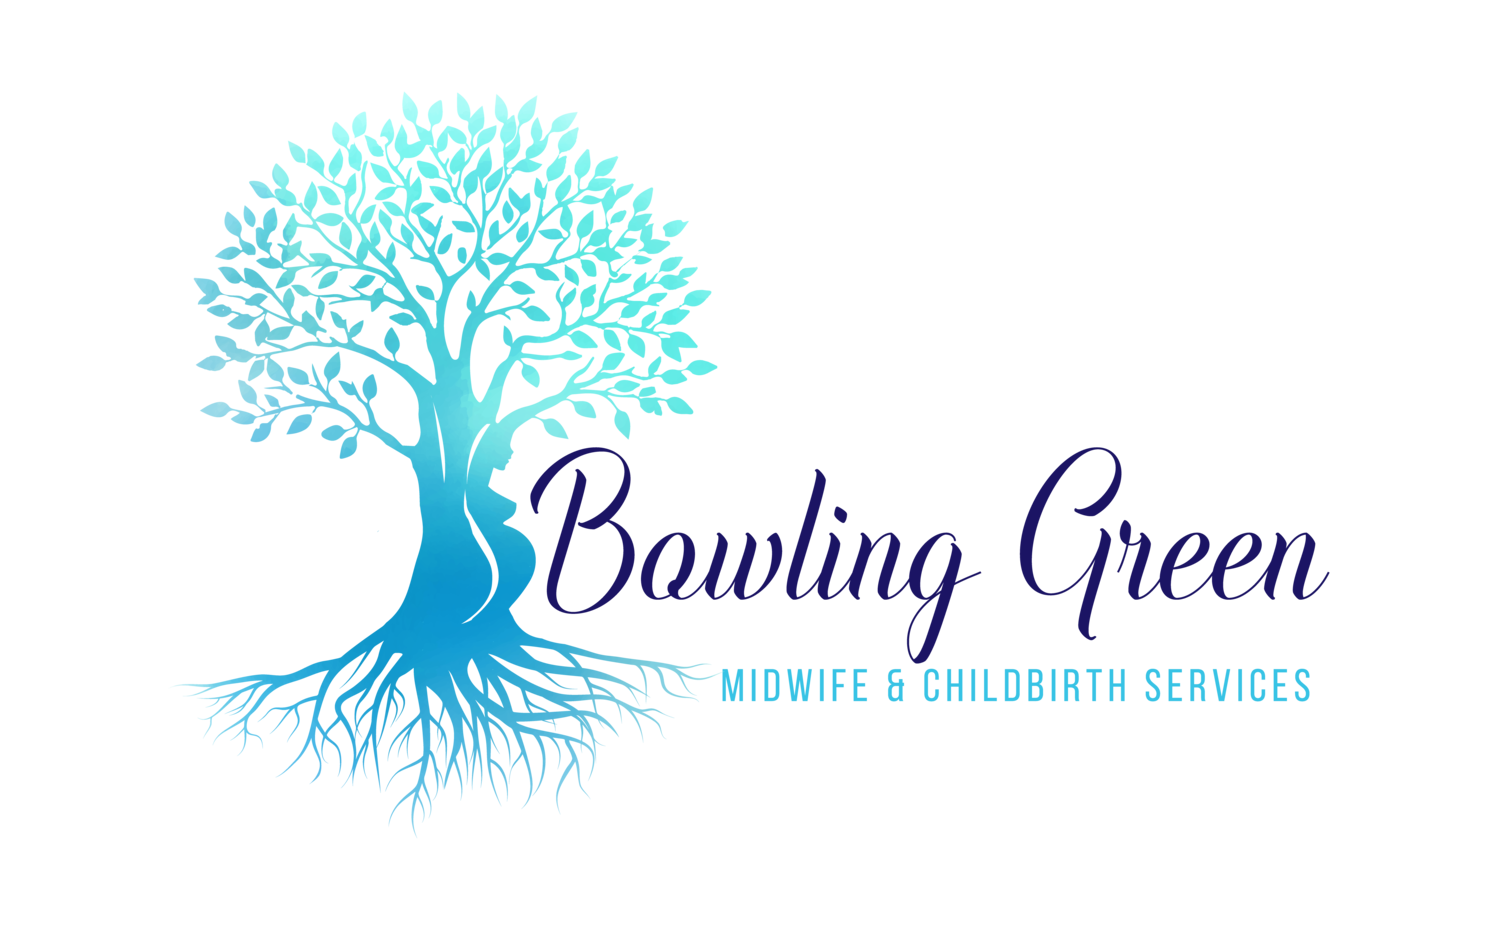 Bowling Green Midwifery &amp; Childbirth Services